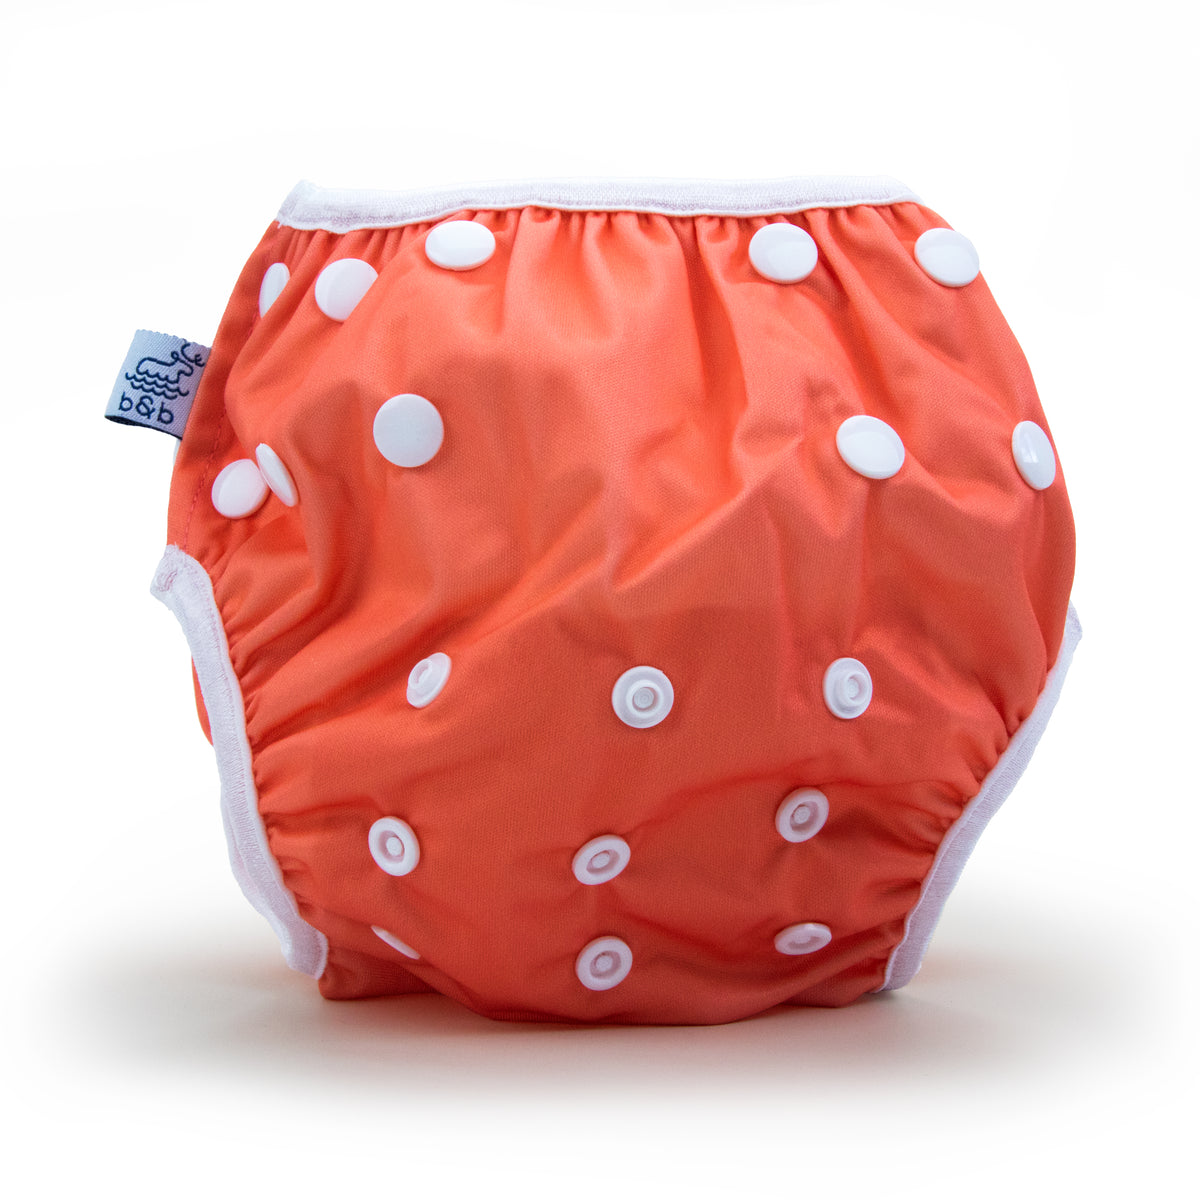 Baby Swim Diapers - What are They and How Can I Purchase the Right Fit? -  Baby Momma Blog